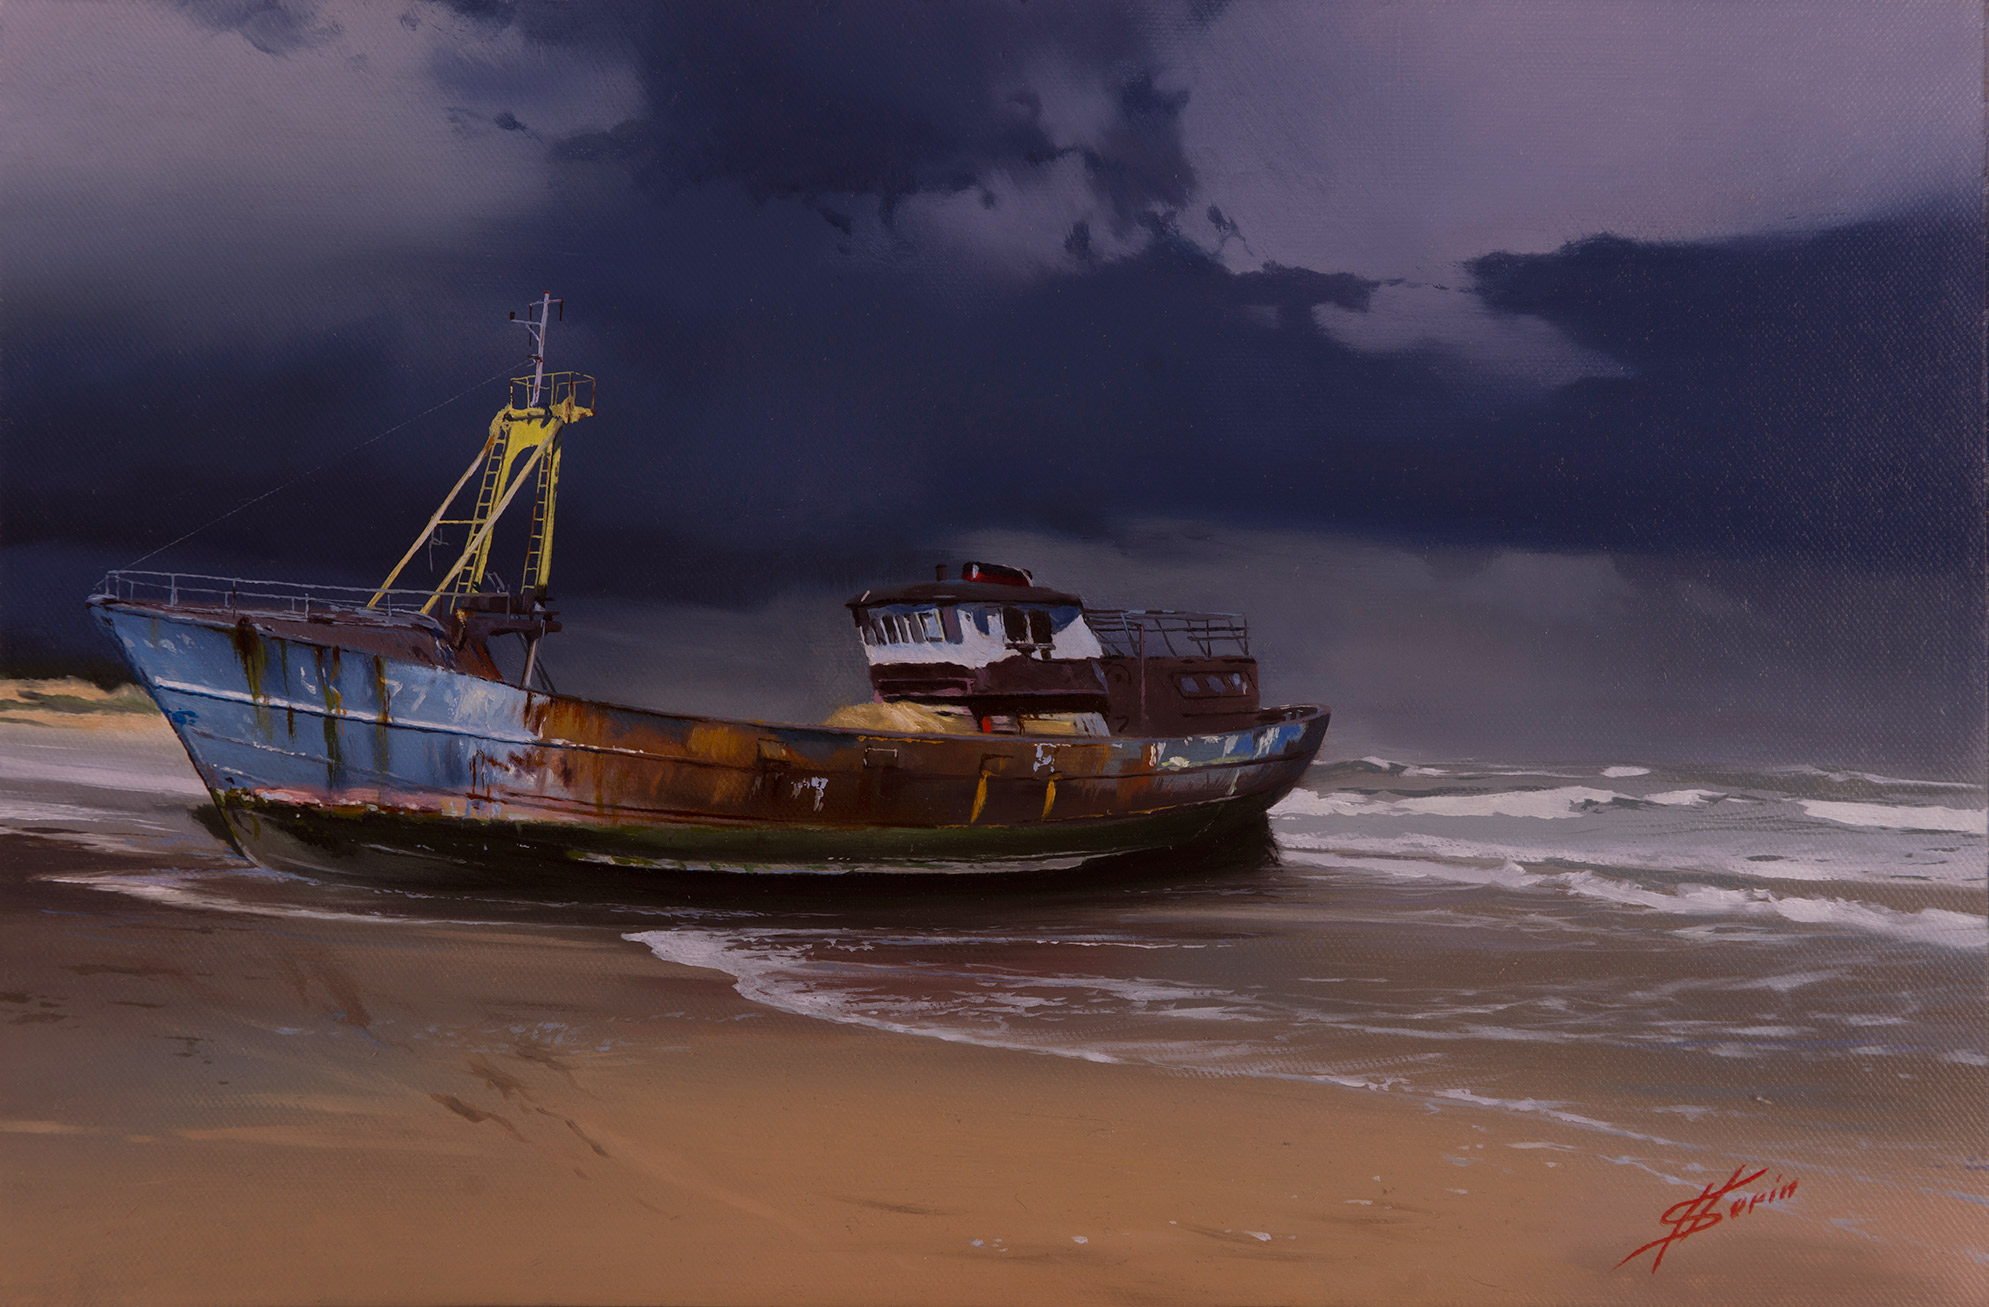 Old fishing-boat, oil on canvas and cardboard, 9.44x13.7in (240x350mm), 2021